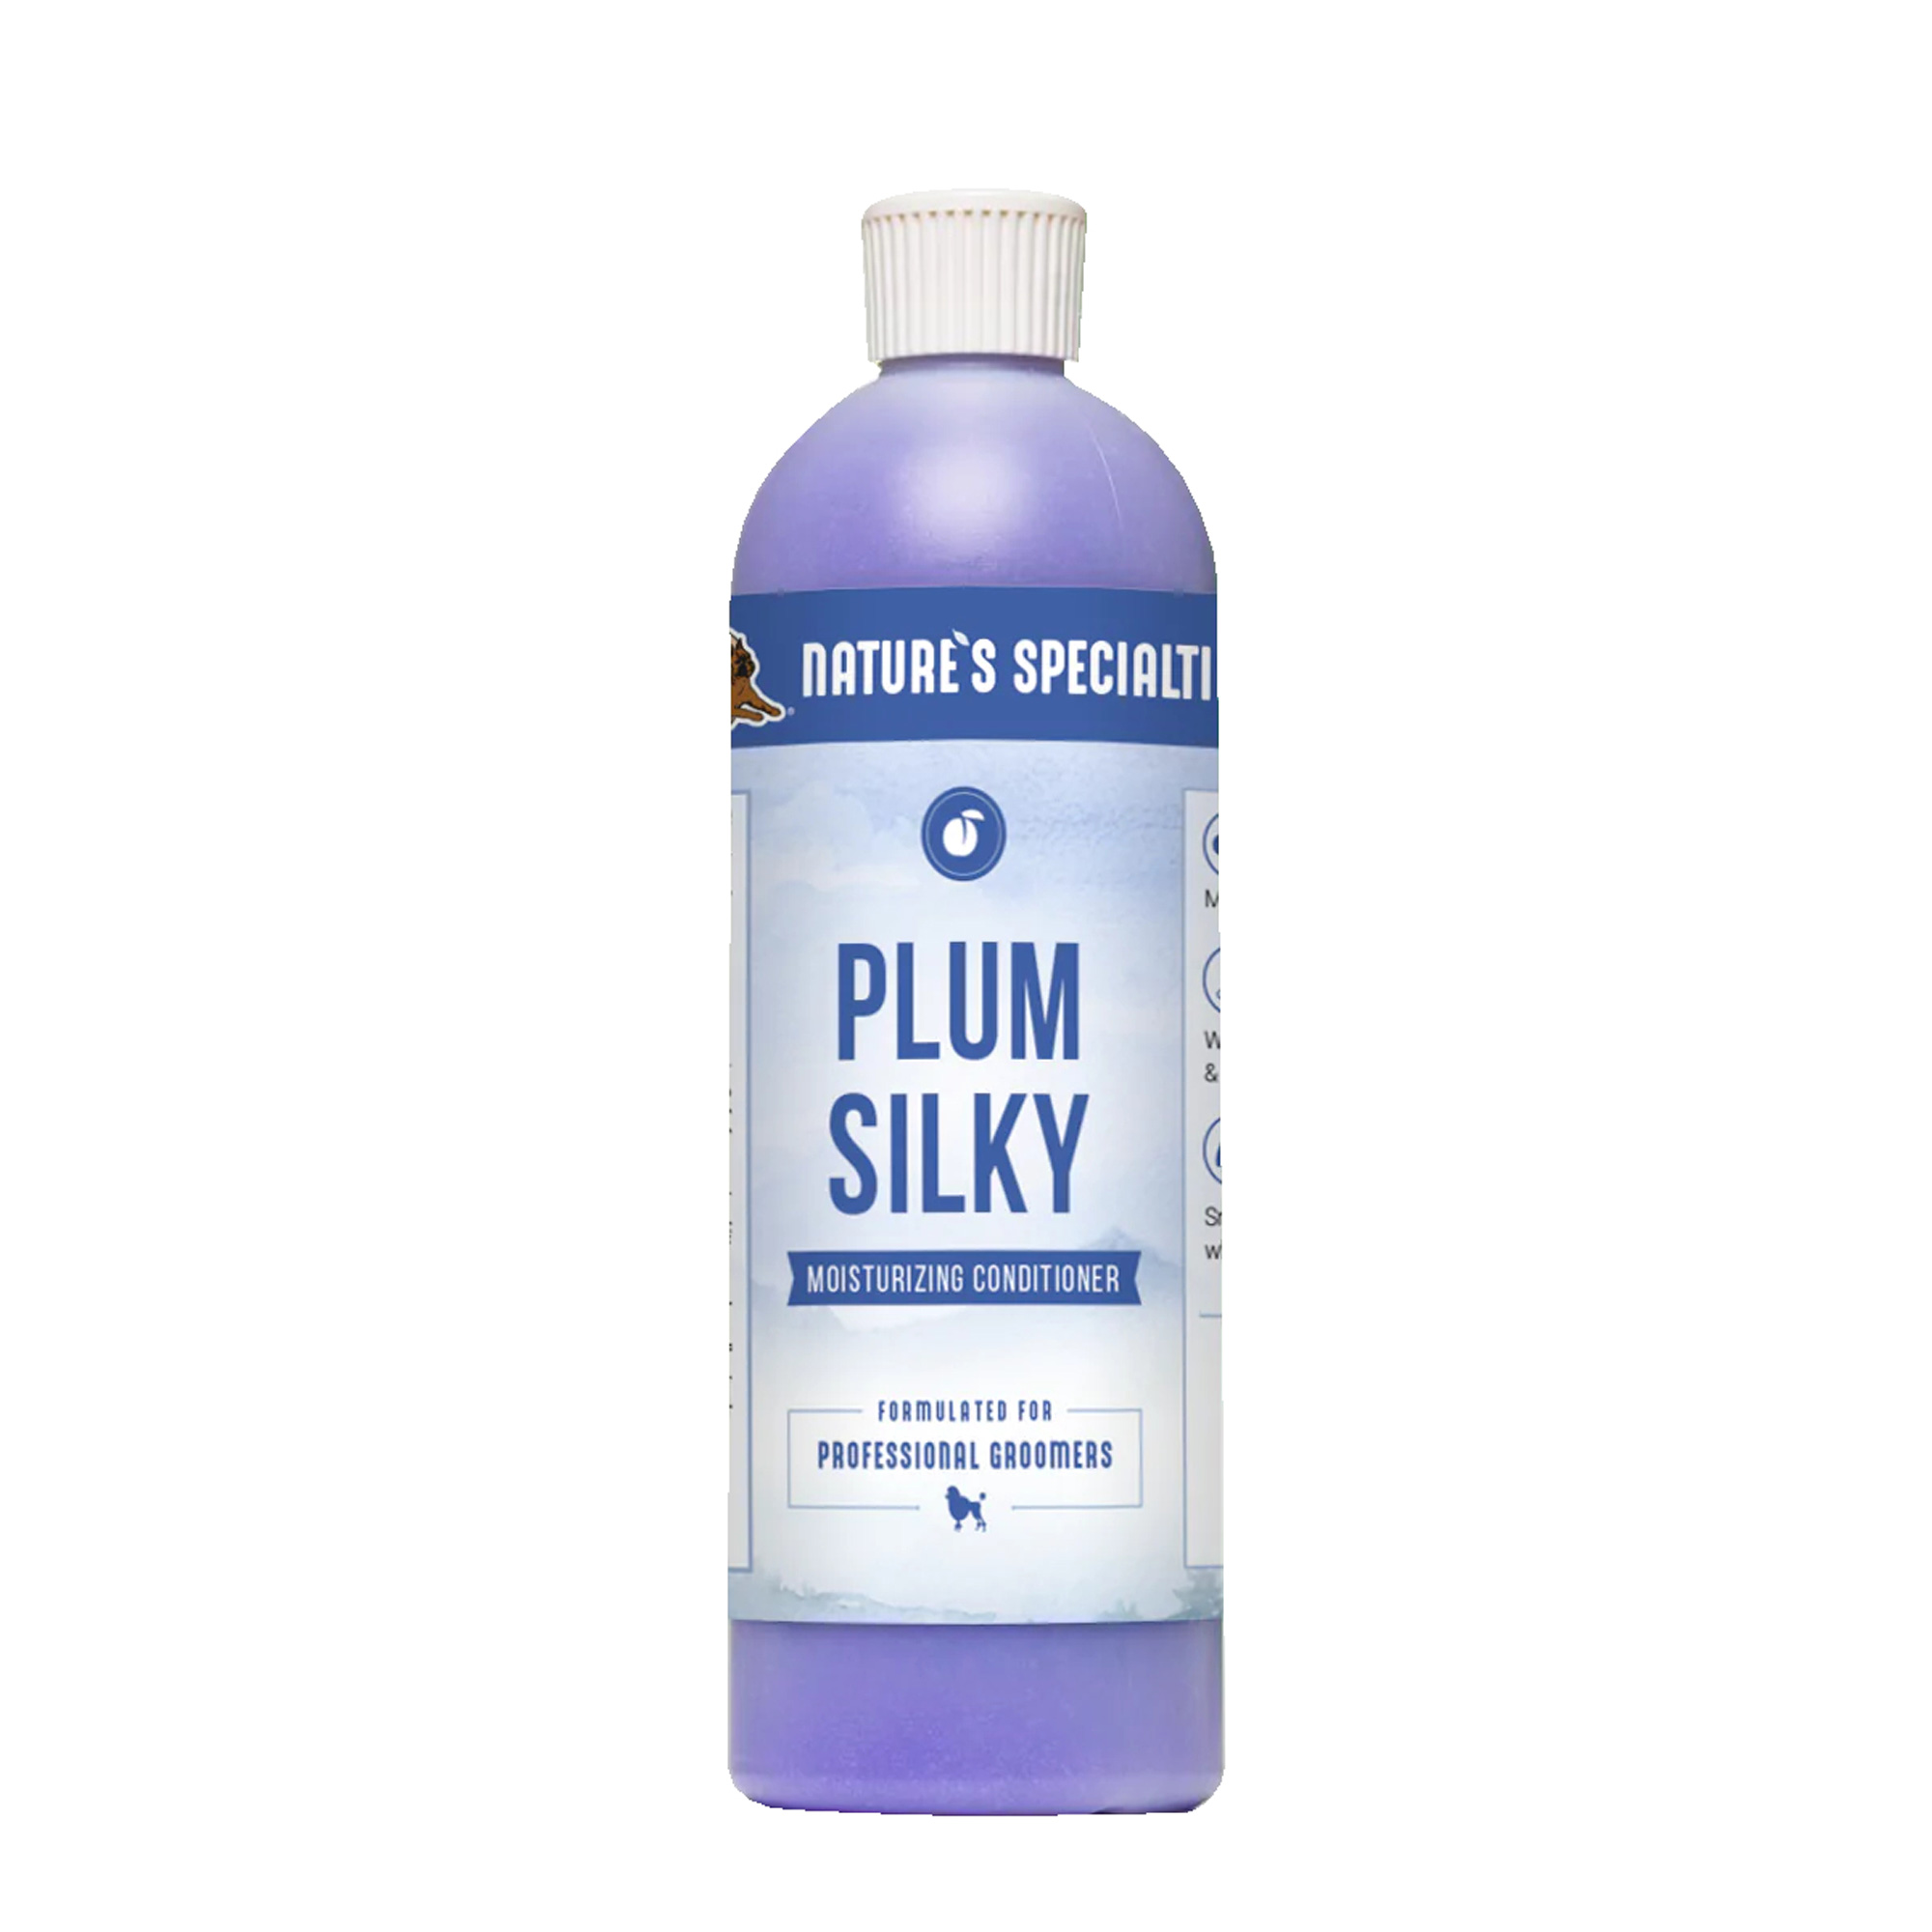 nature specialities plum silky conditioner 16oz for dog grooming